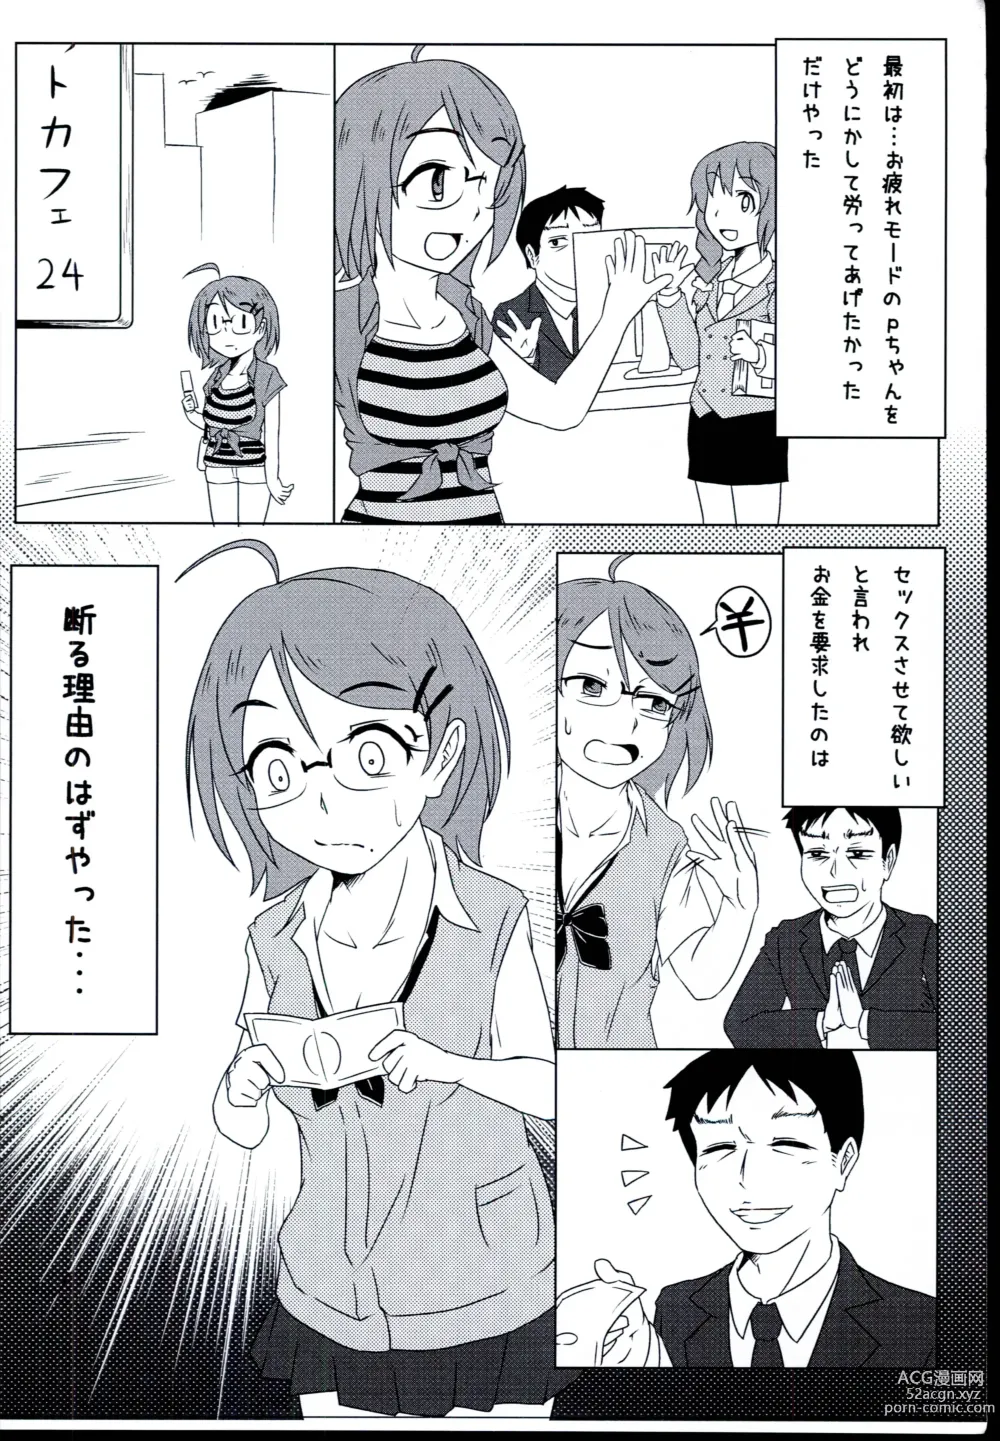 Page 4 of doujinshi After Zero